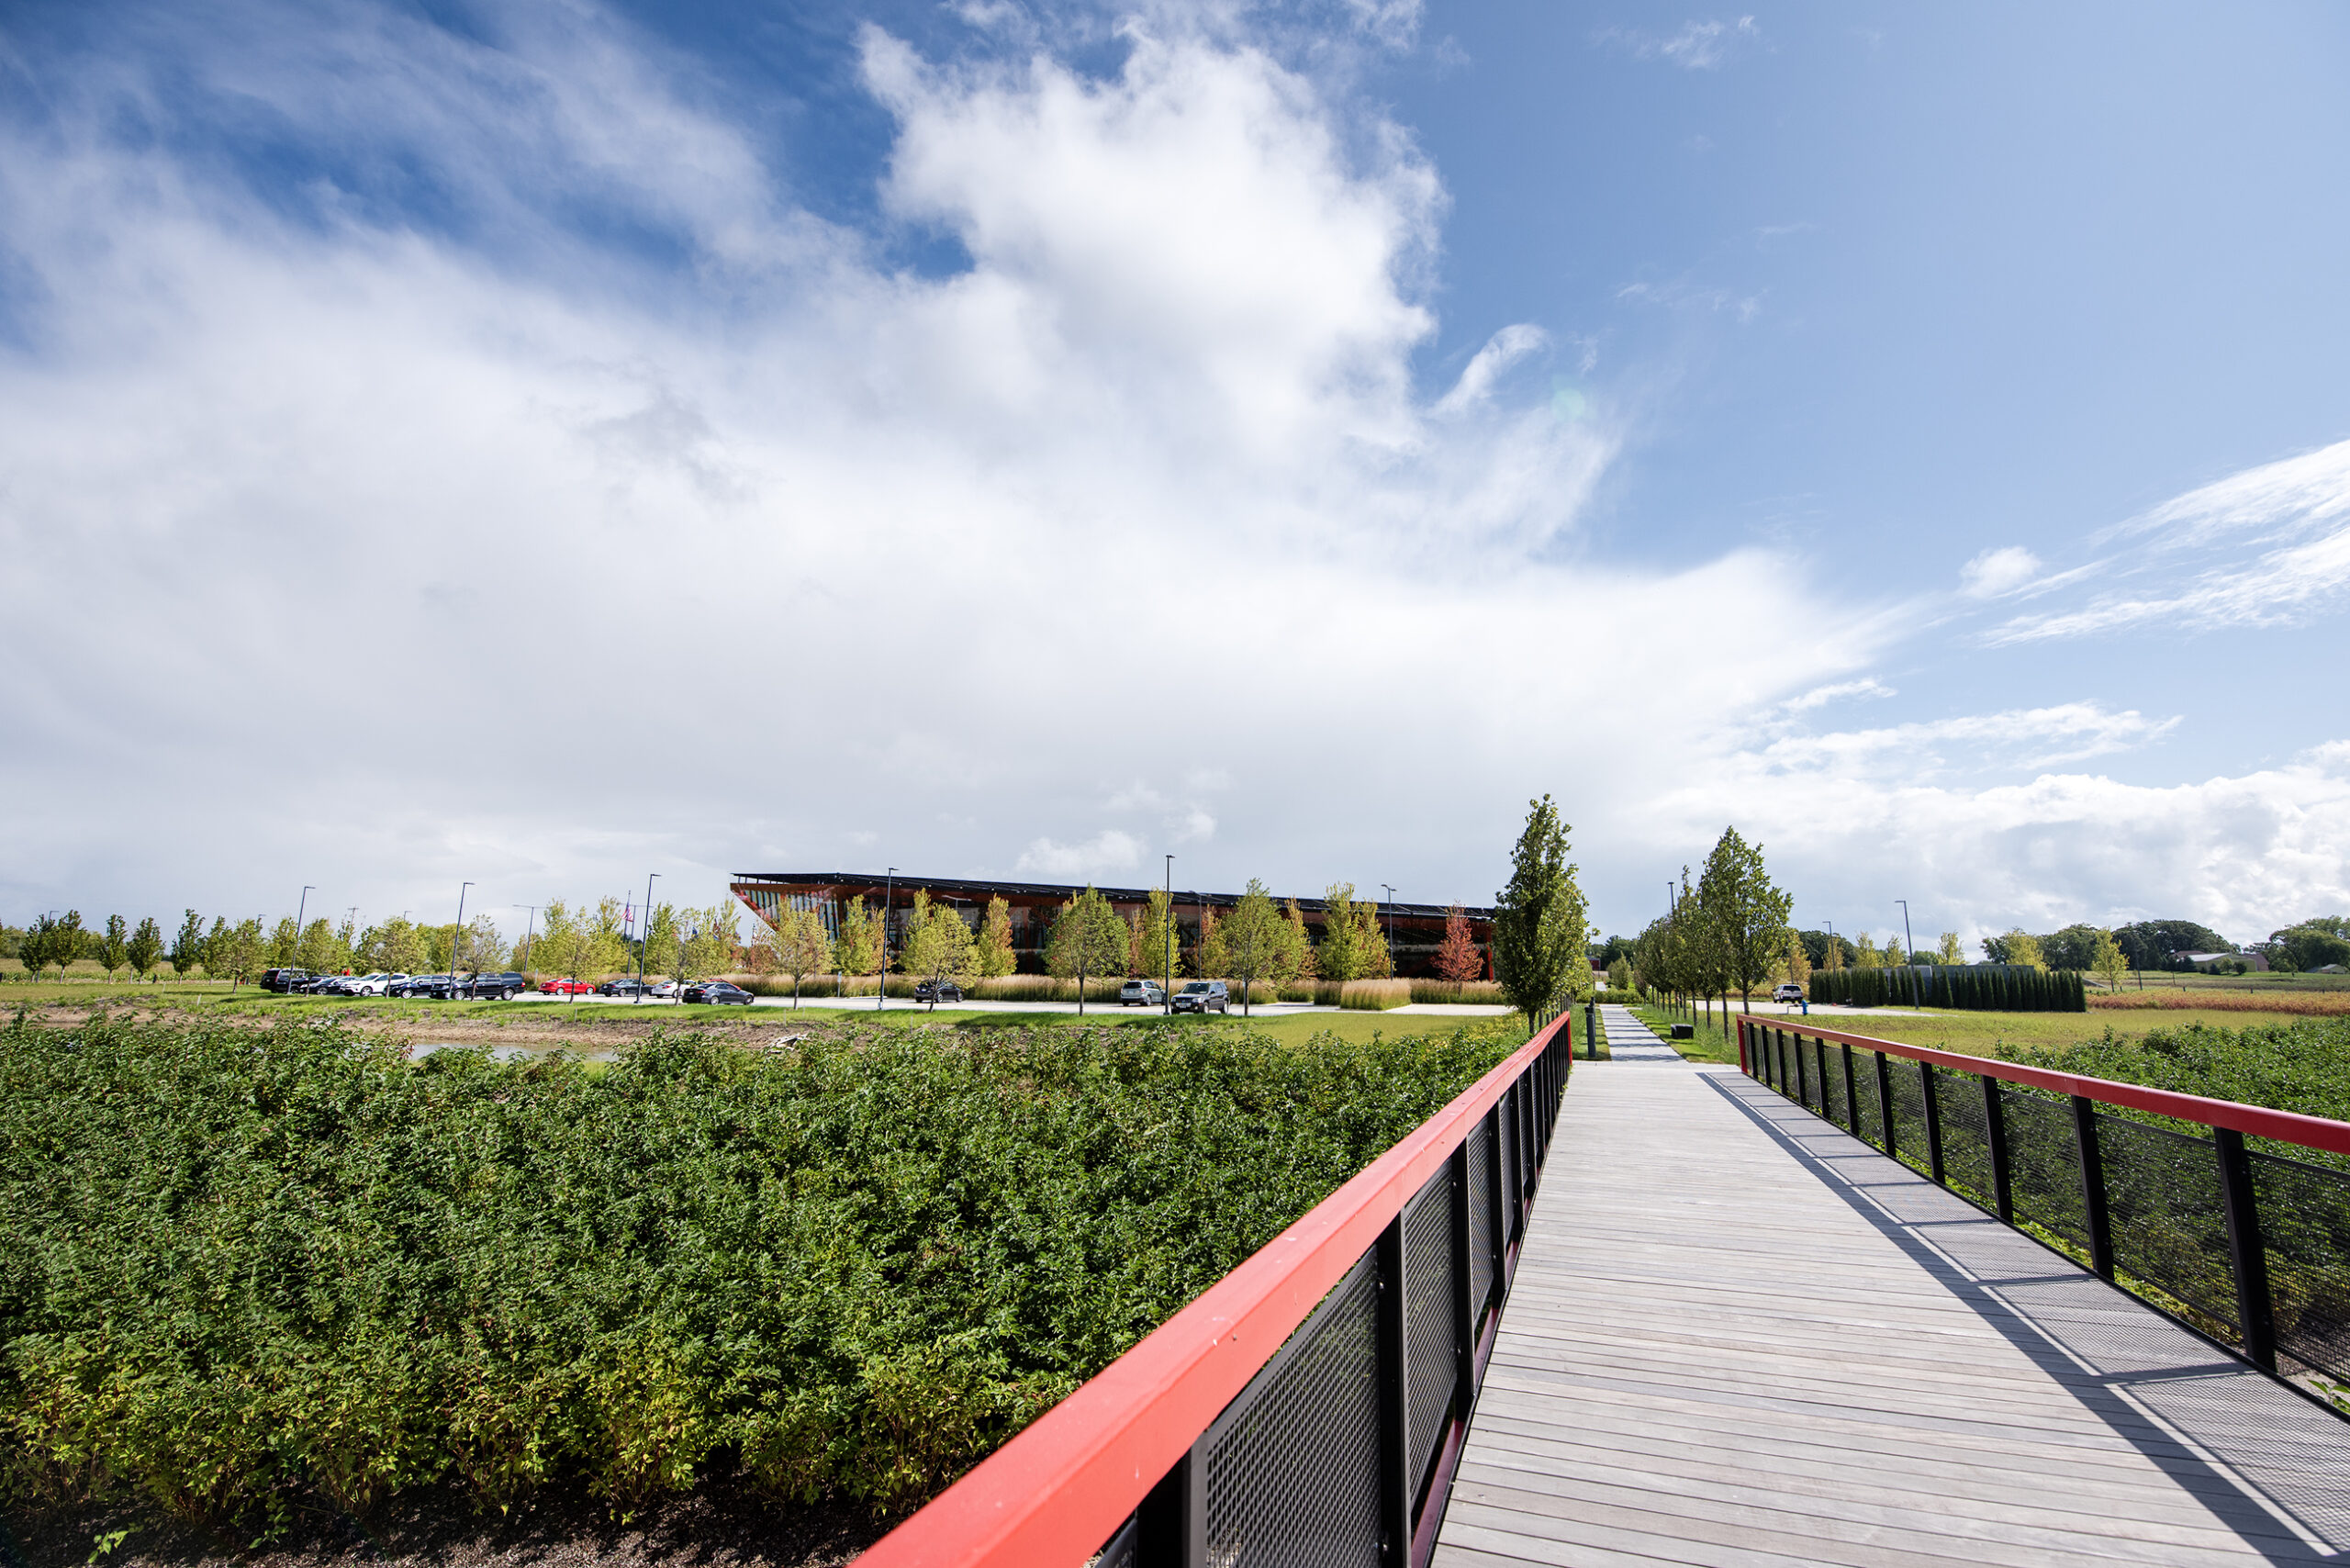 A pathway with railing that matches the red beams of the building